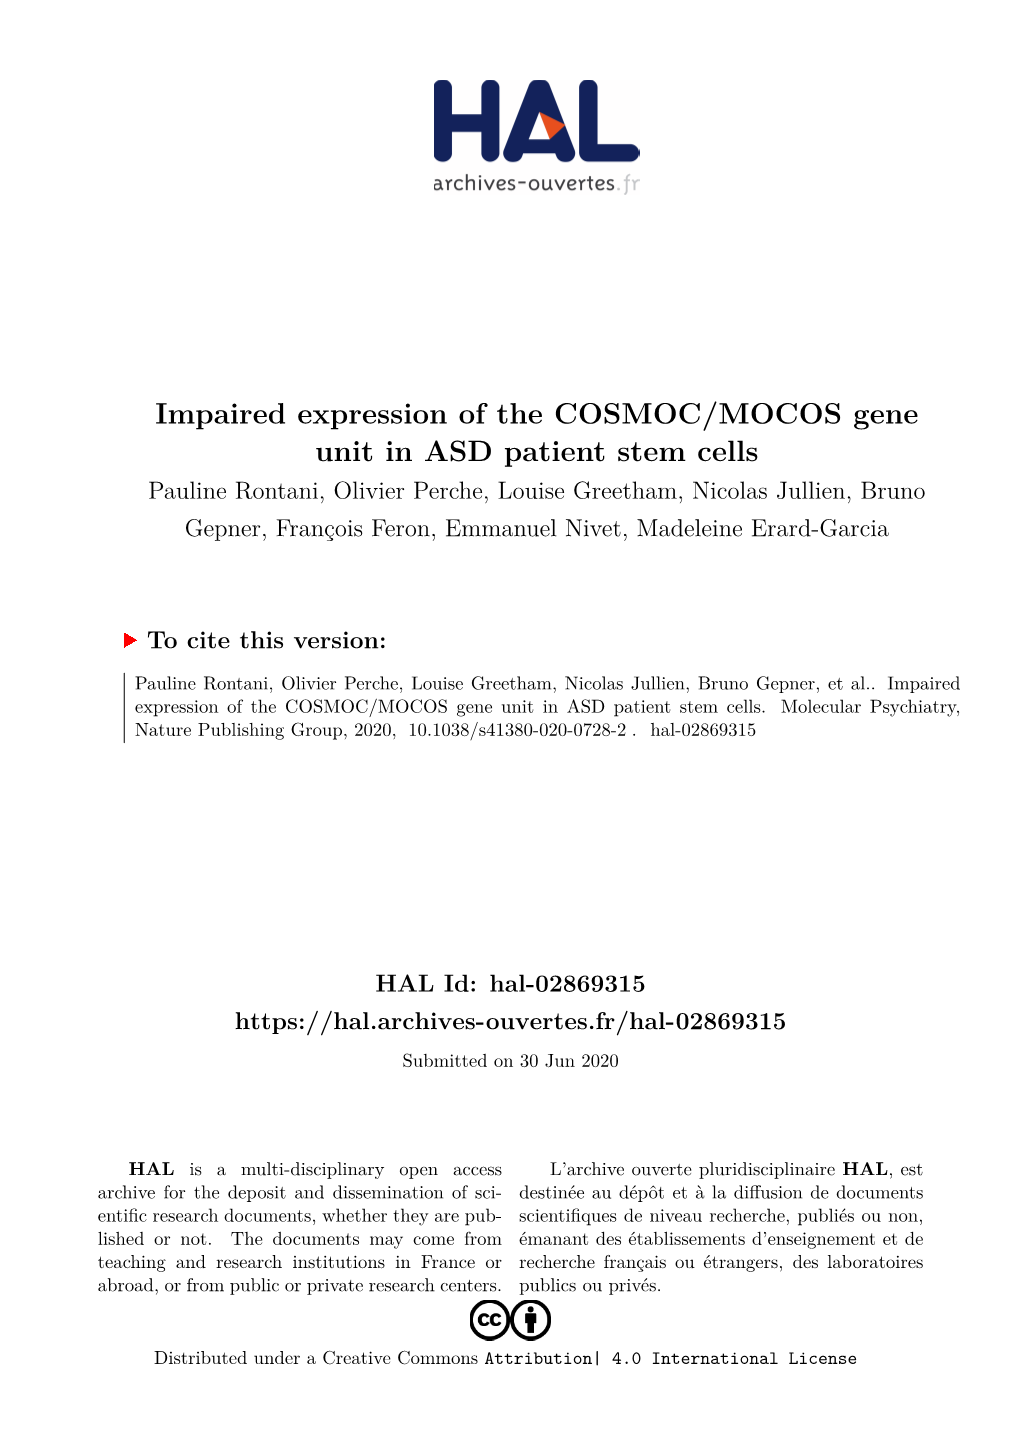 Impaired Expression of the COSMOC/MOCOS Gene Unit in ASD Patient Stem Cells